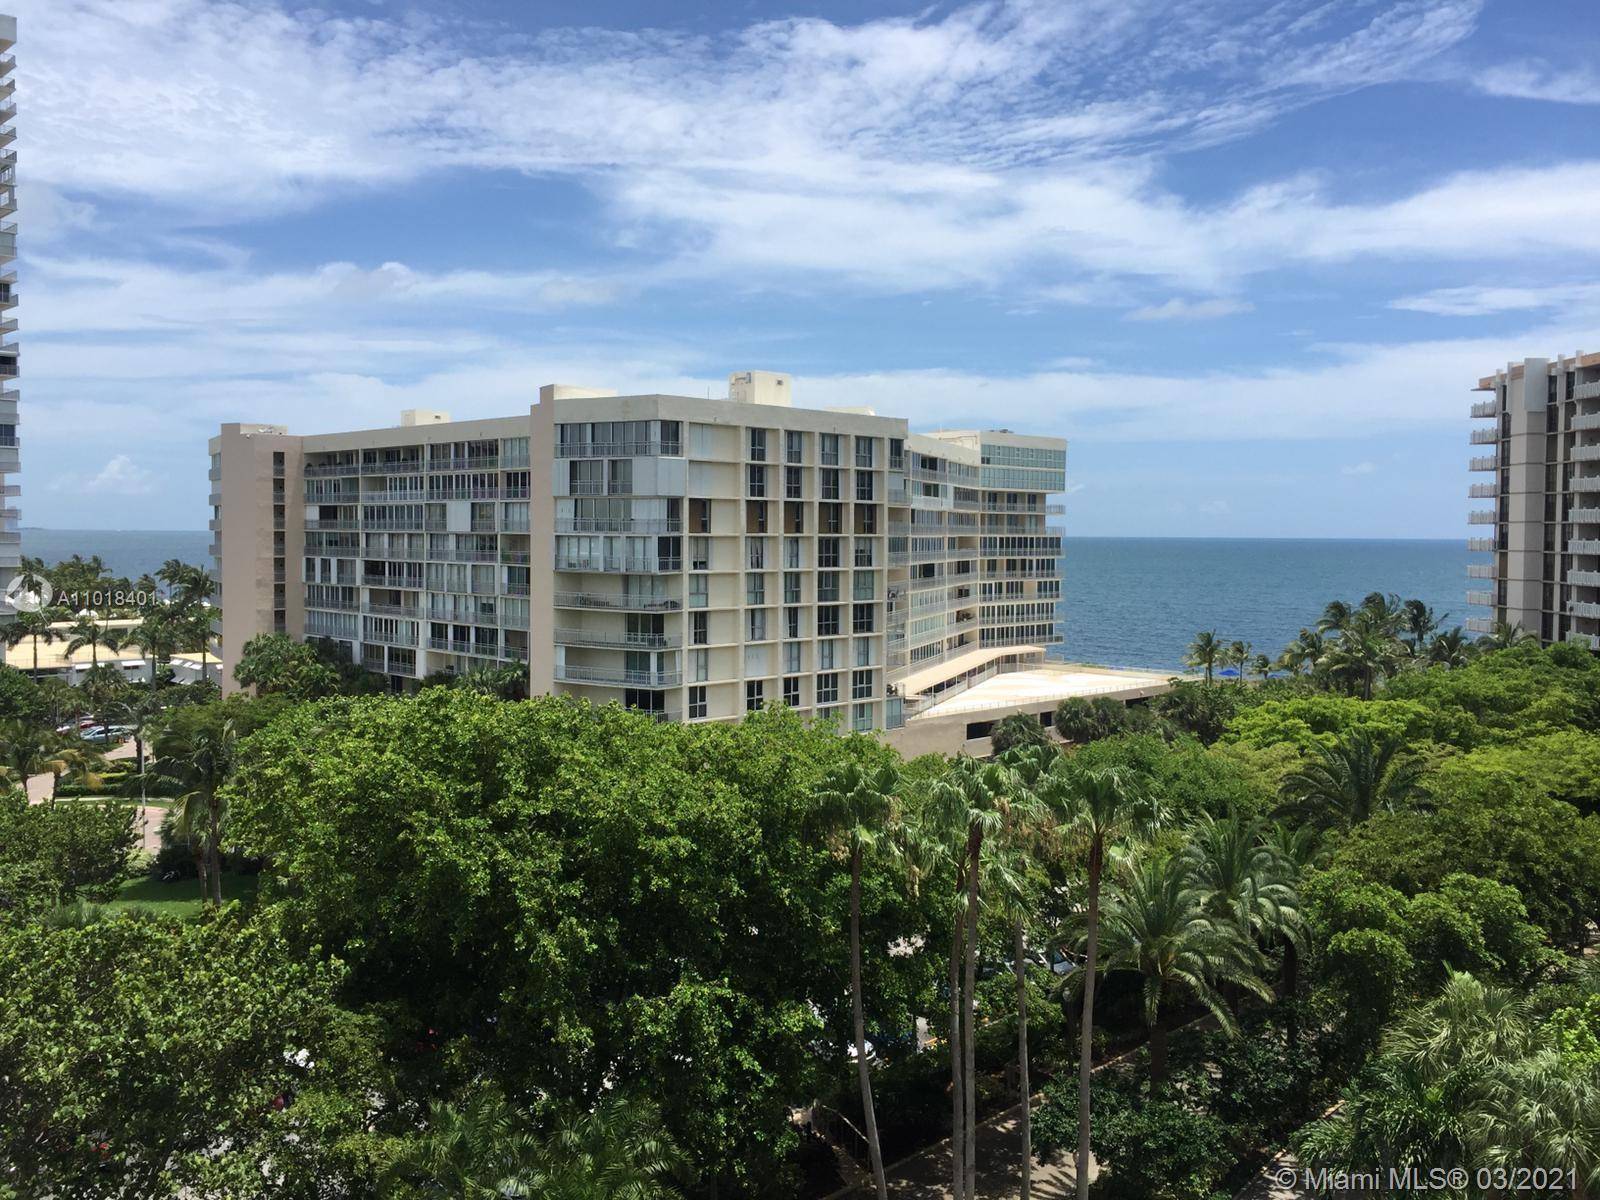 Just listed renovated corner unit at The Towers of Key Biscayne.